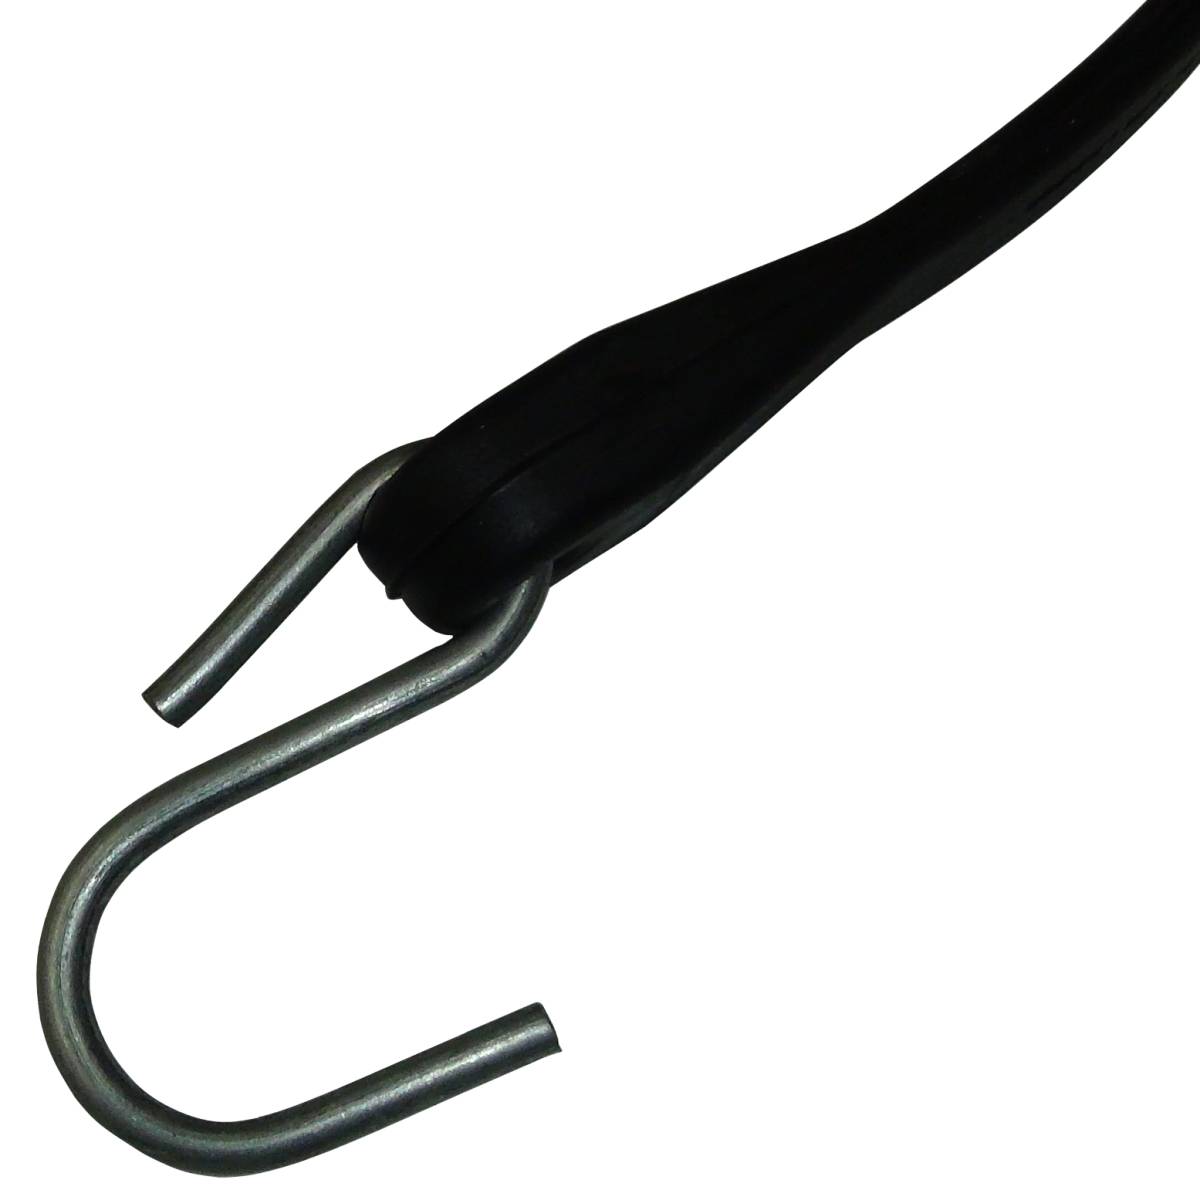 Rs-21c Natural Rubber Tarp Bungee Straps Crimped Hooks 21" for sale online